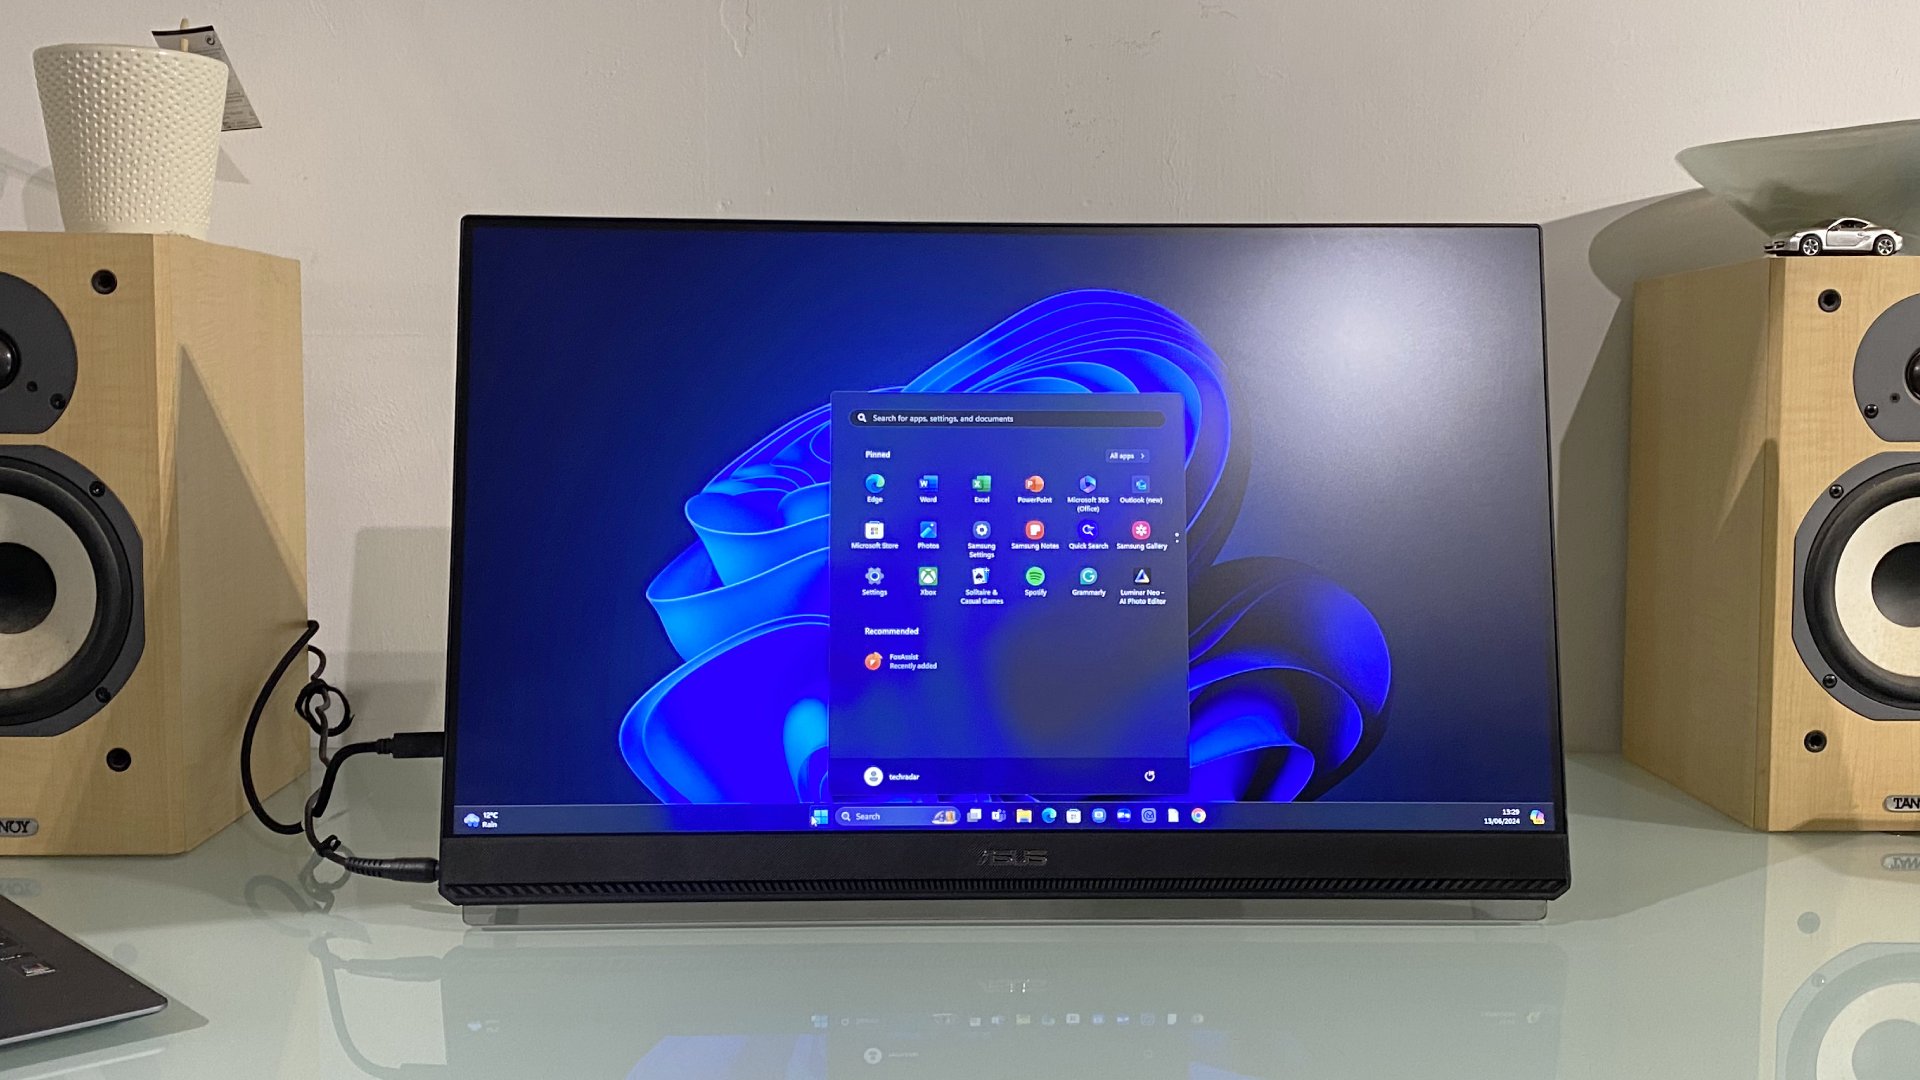 Asus Zenscreen MB249C during our test in a home office